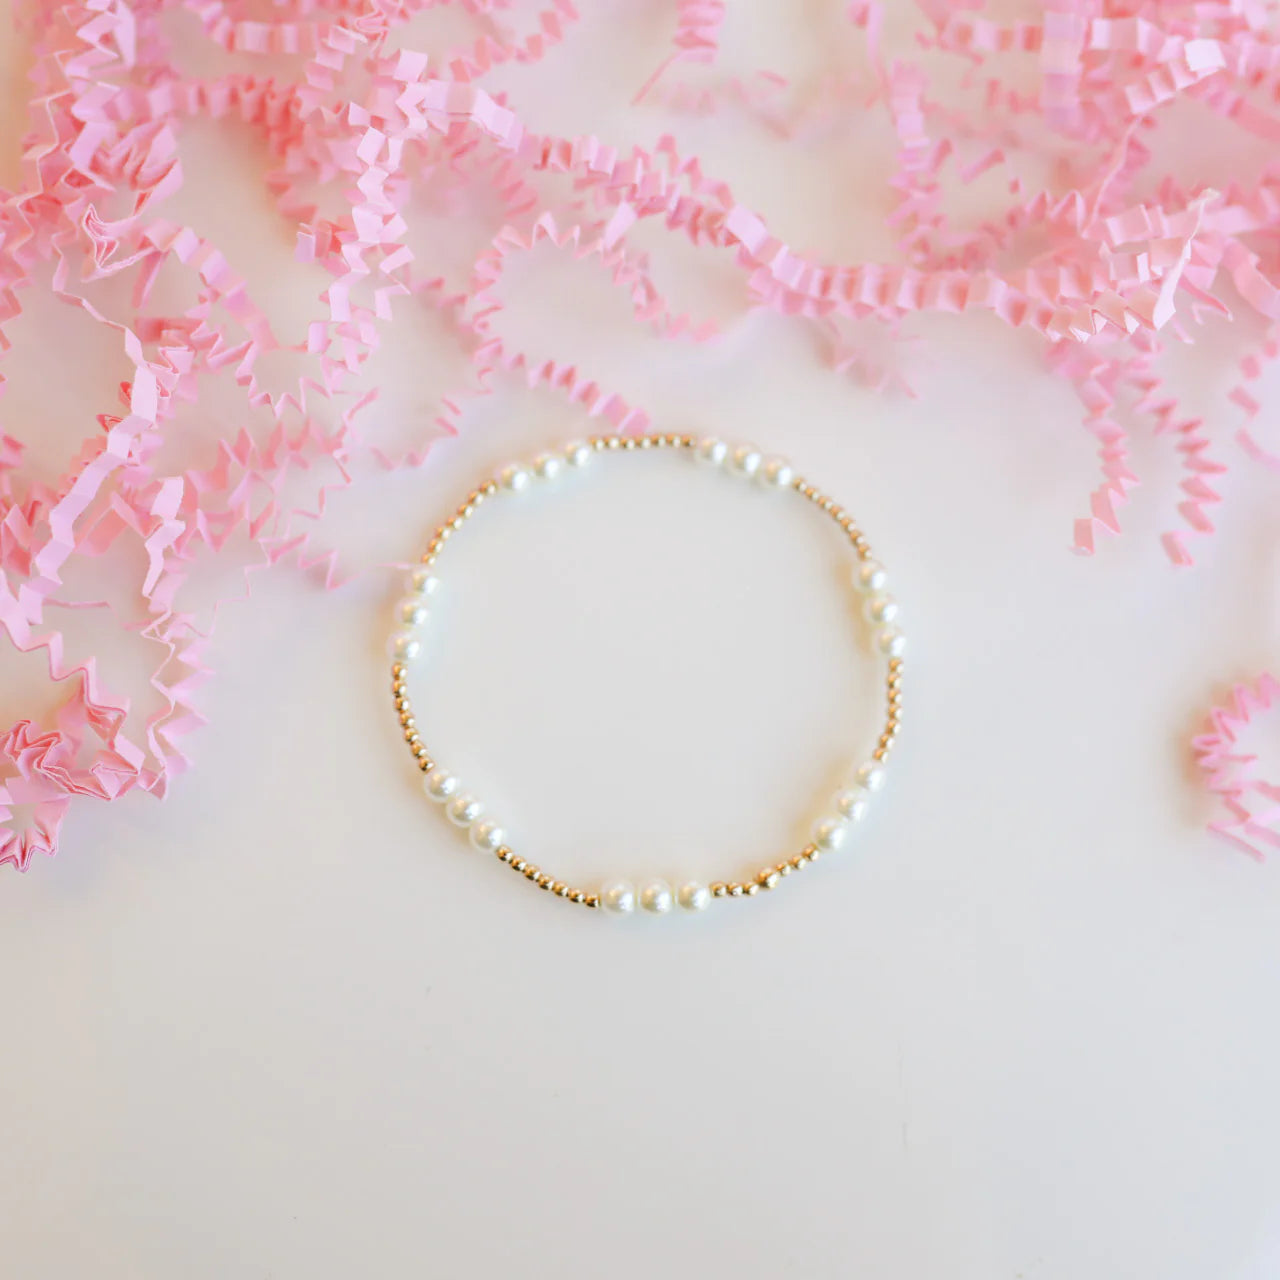 Beaded Blondes | ILY Pearl Bracelet in Gold - Giddy Up Glamour Boutique